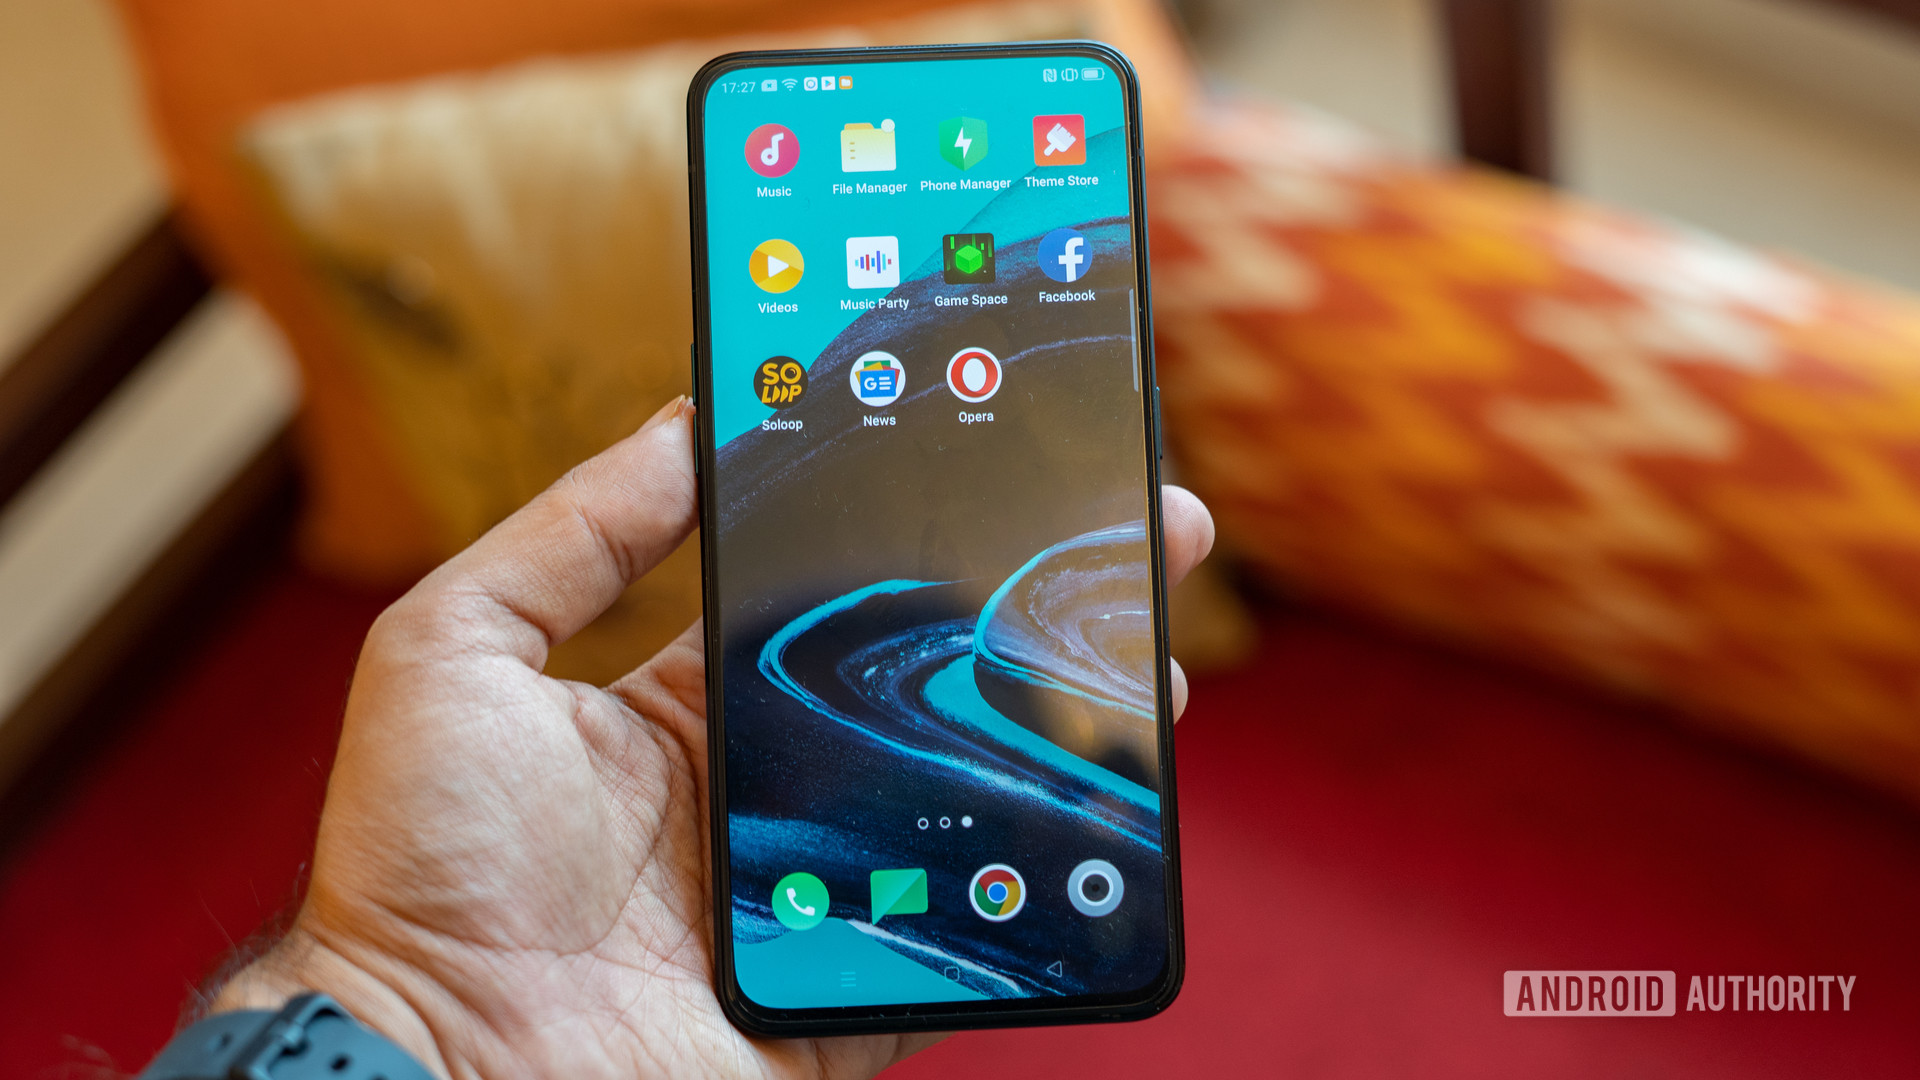 OPPO Reno 2 in hand with display on anbd homescreen